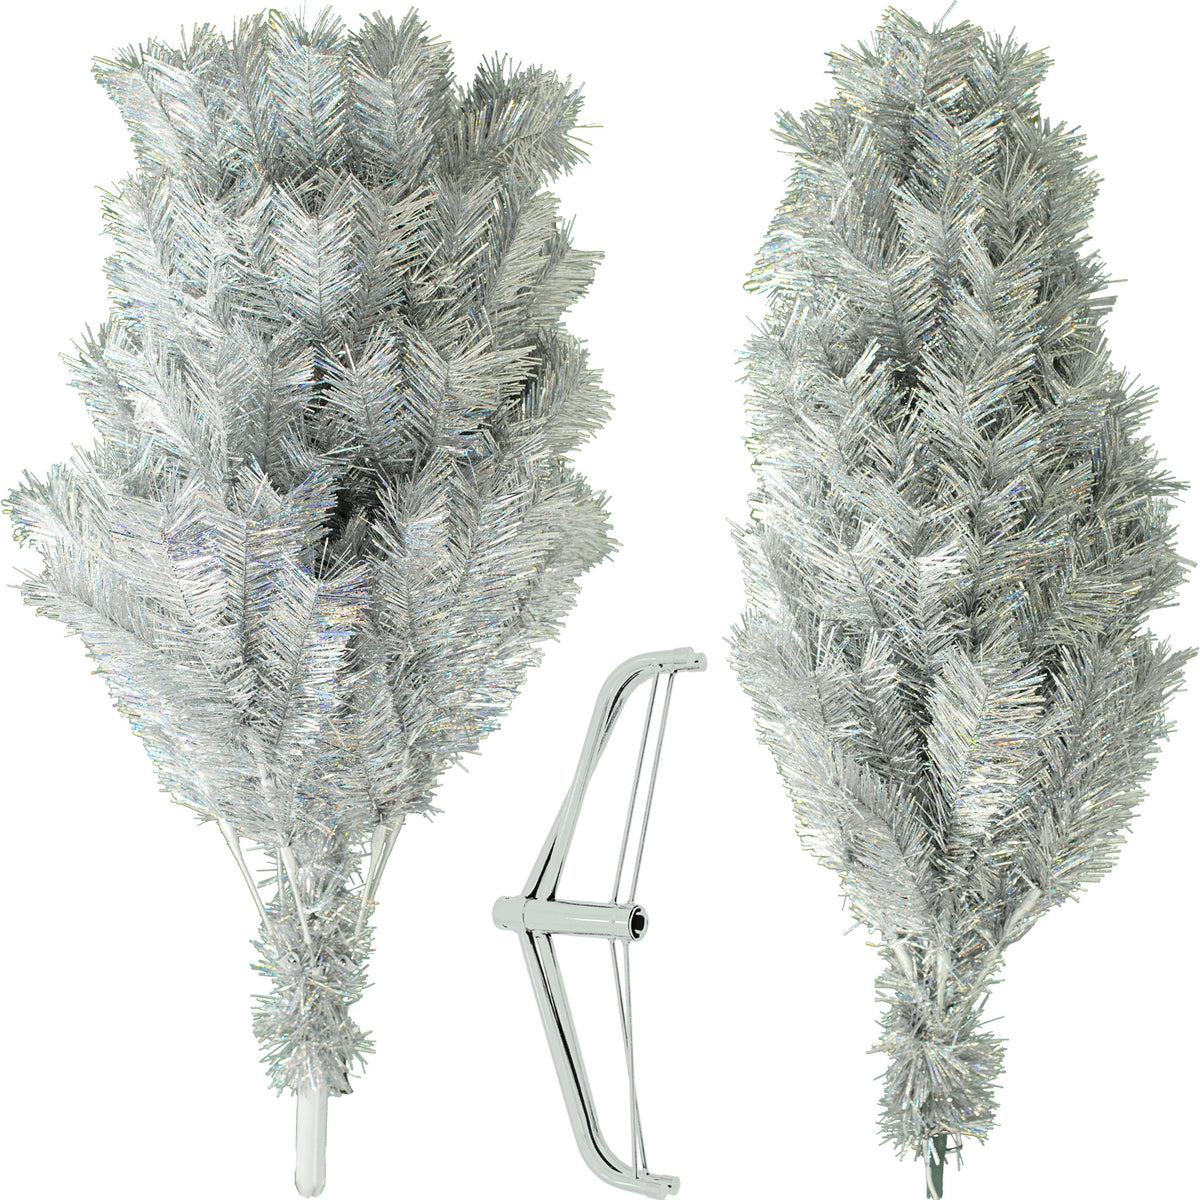 The 5FT Tall Luxe Christmas Silver Tinsel Tree comes in 2 pieces with a white folding stand included